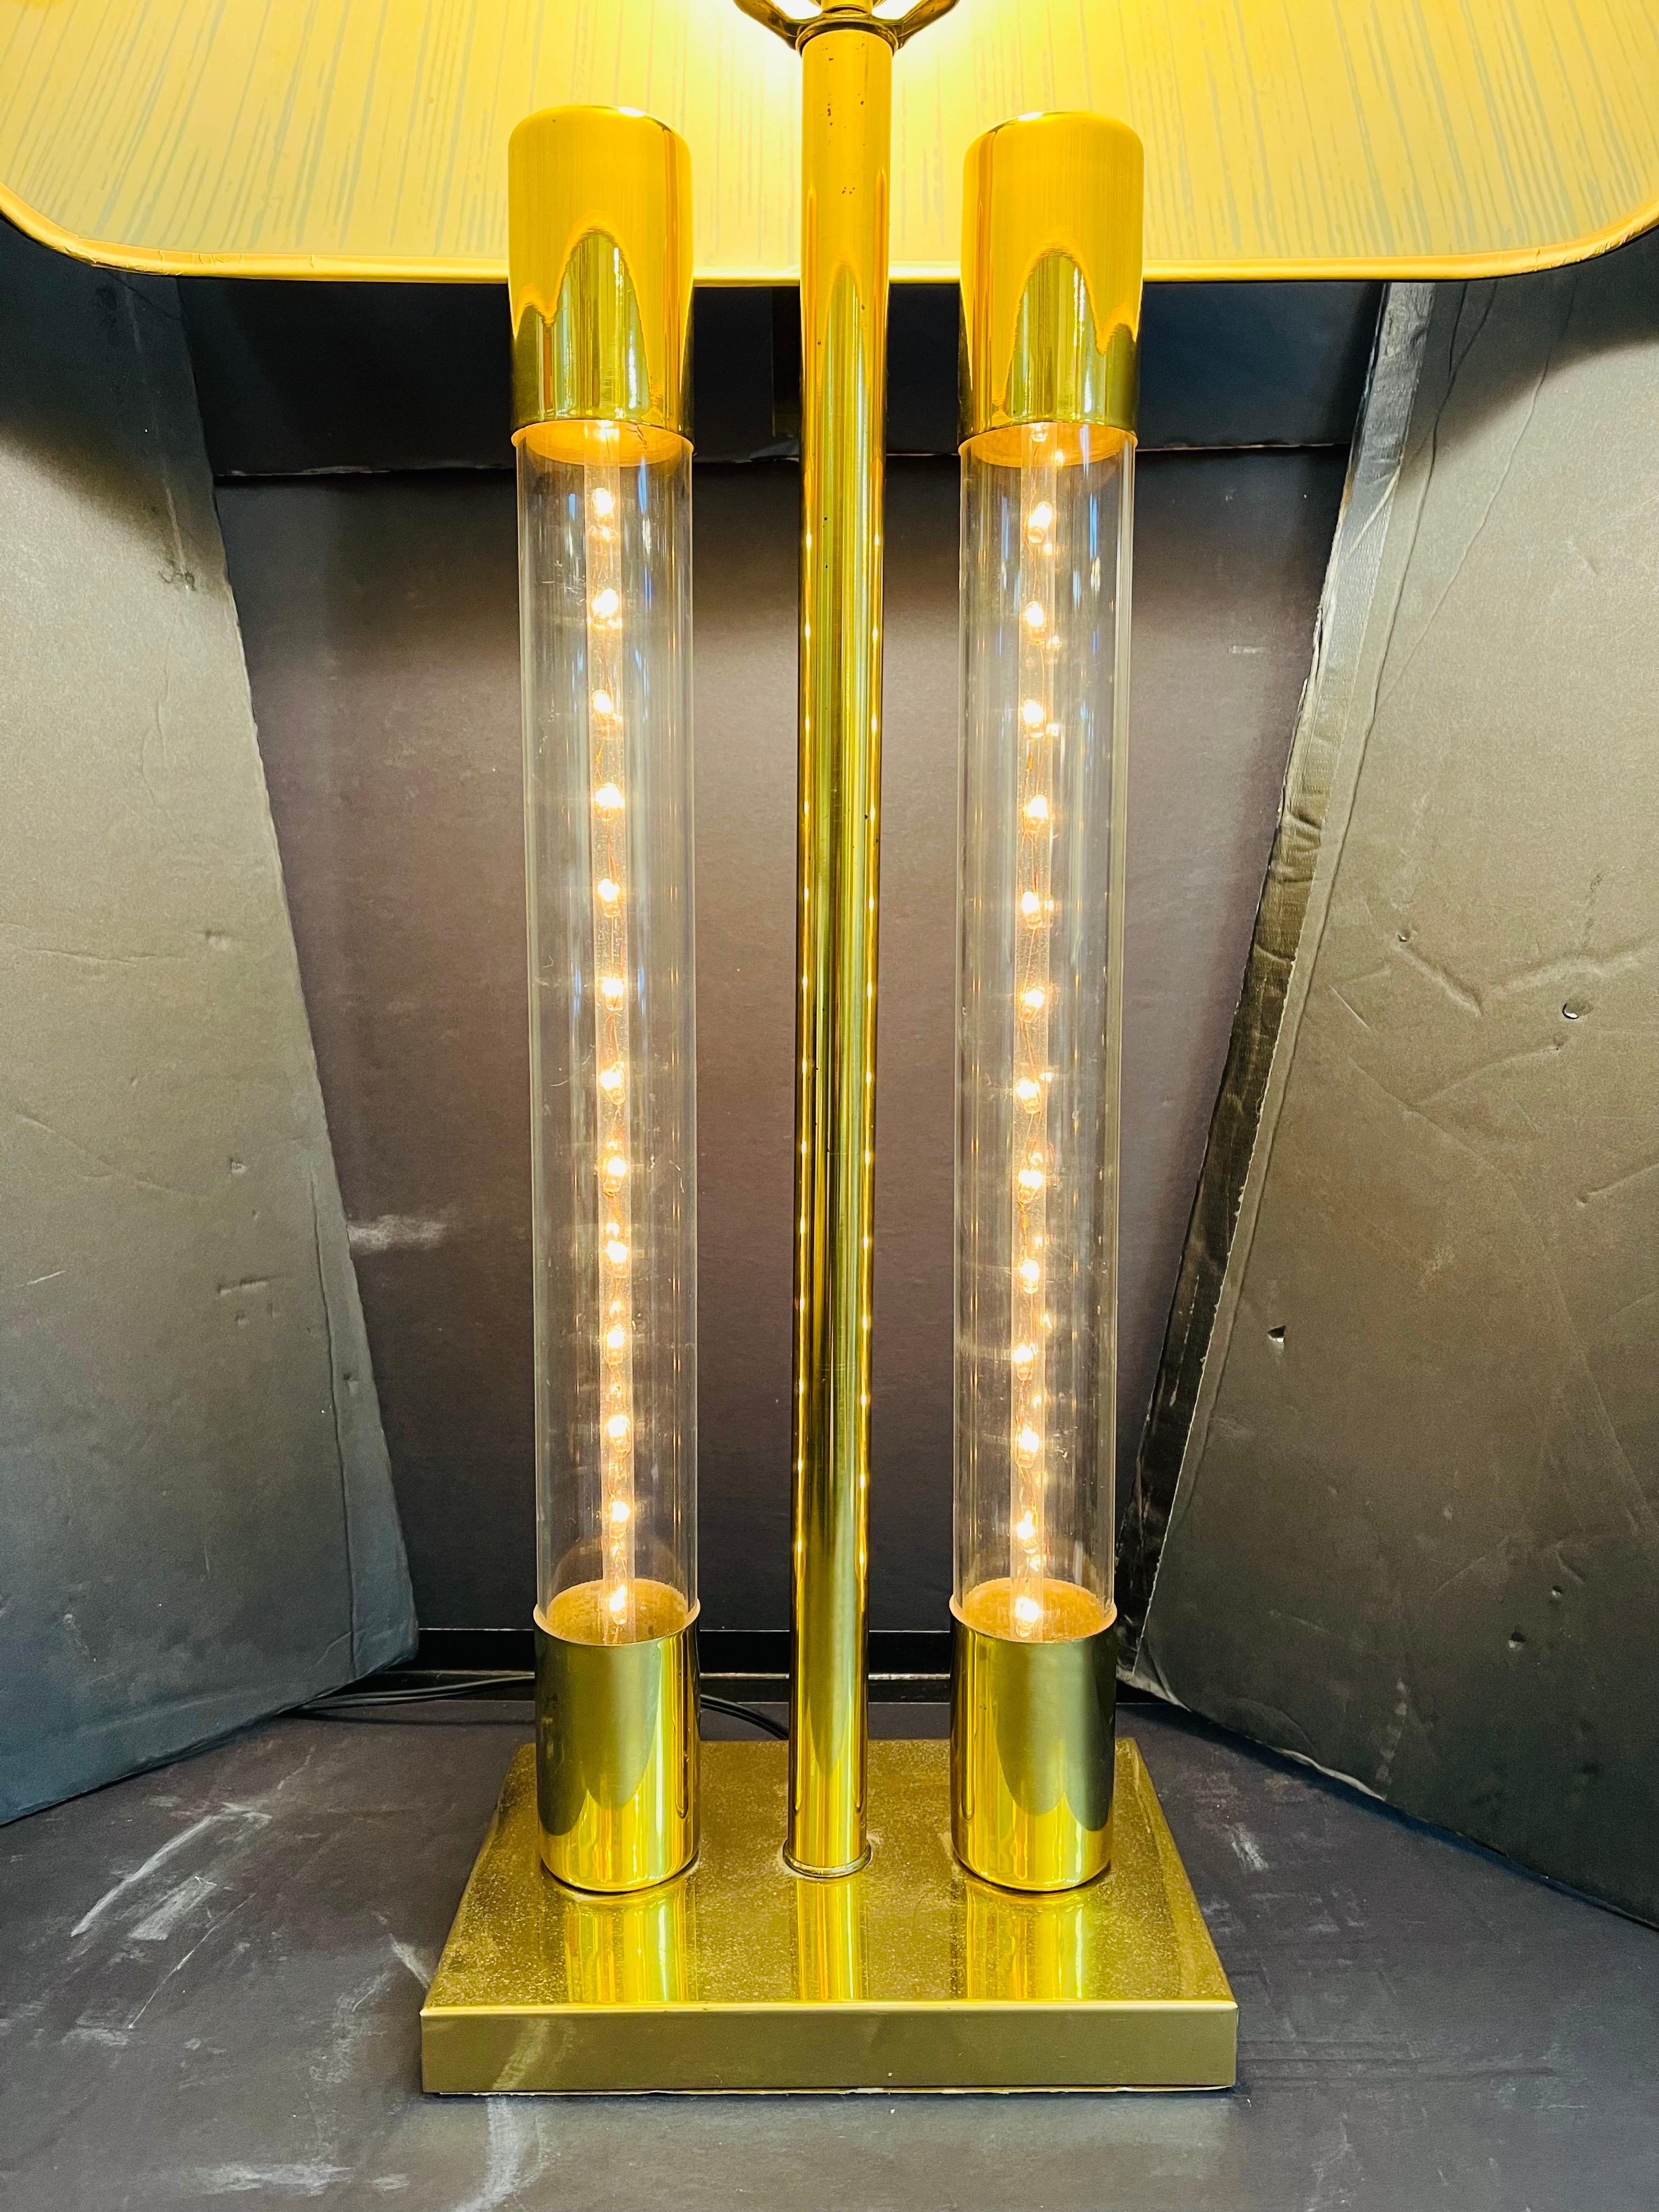 A vintage, late 20th century, brassy and clear tube light up table lamp. The table lamp features a three way switch which allows the light bulb to be illuminated, or the two clear plastic tubes with interior strings of lights to be illuminated, or